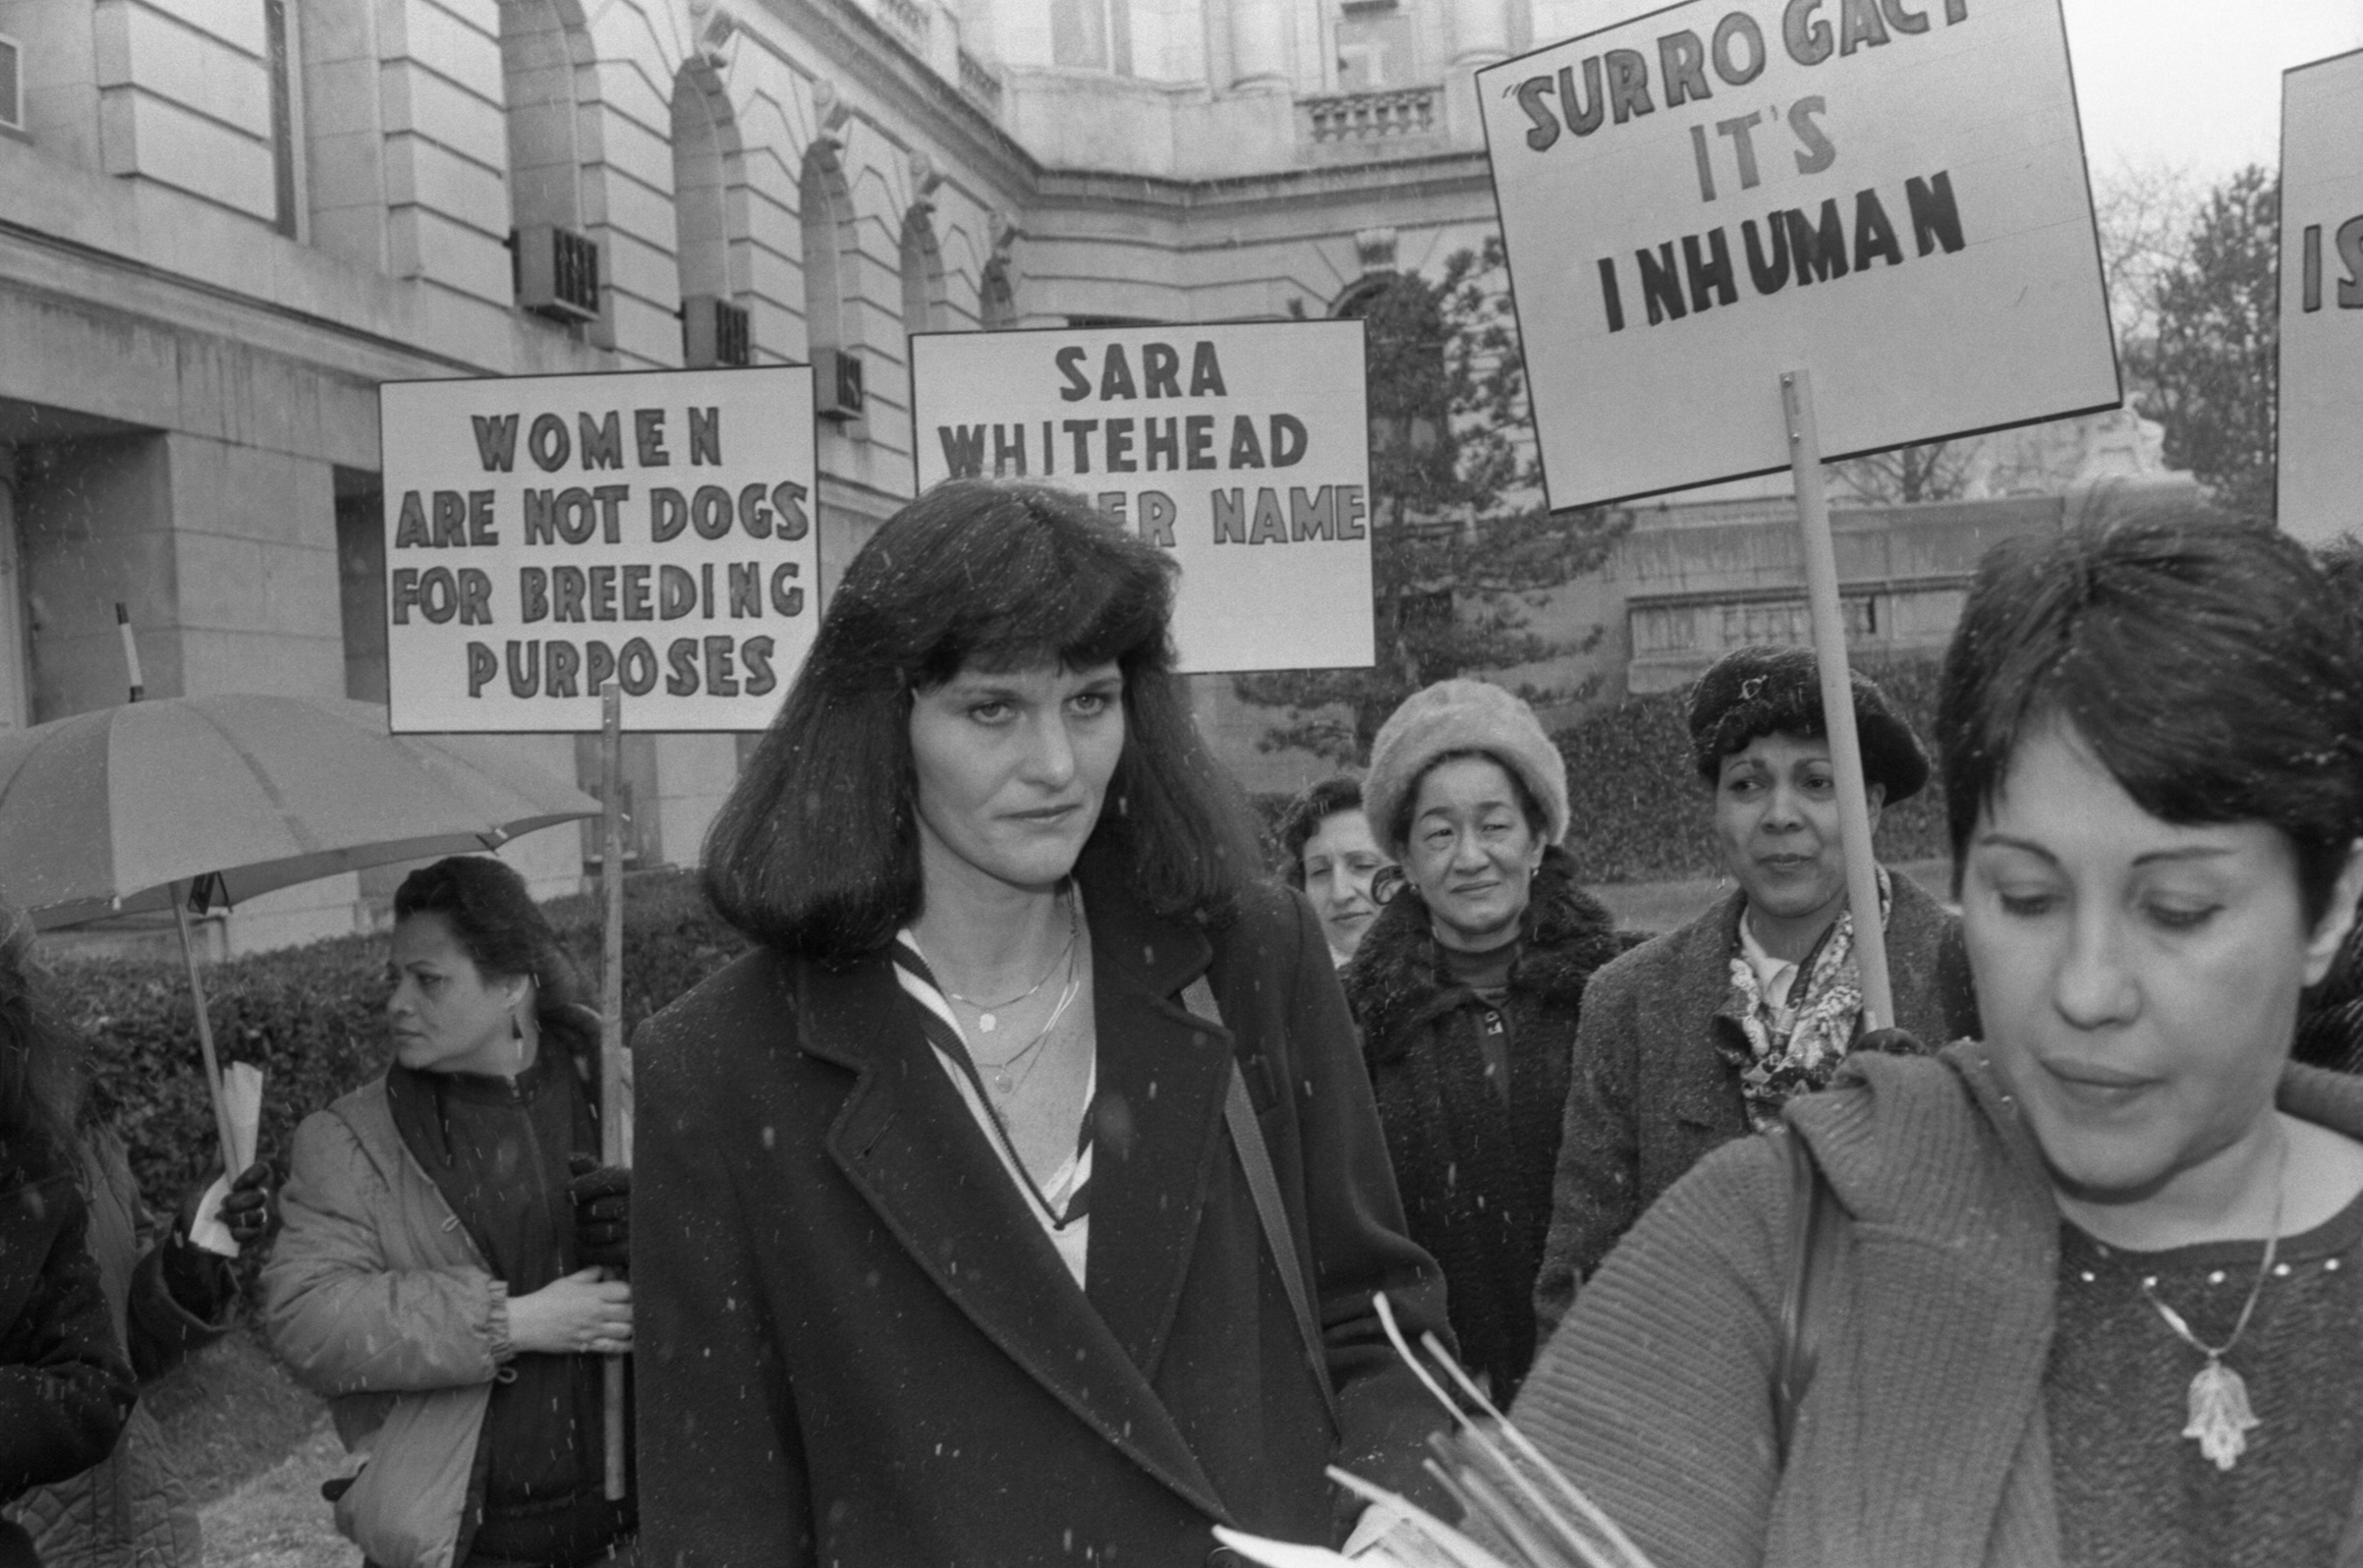 Surrogate mother Mary Beth Whitehead joins a group of women demonstrating on her behalf outside Bergen County courthouse on March 12, 1987, after the lawyers in the 